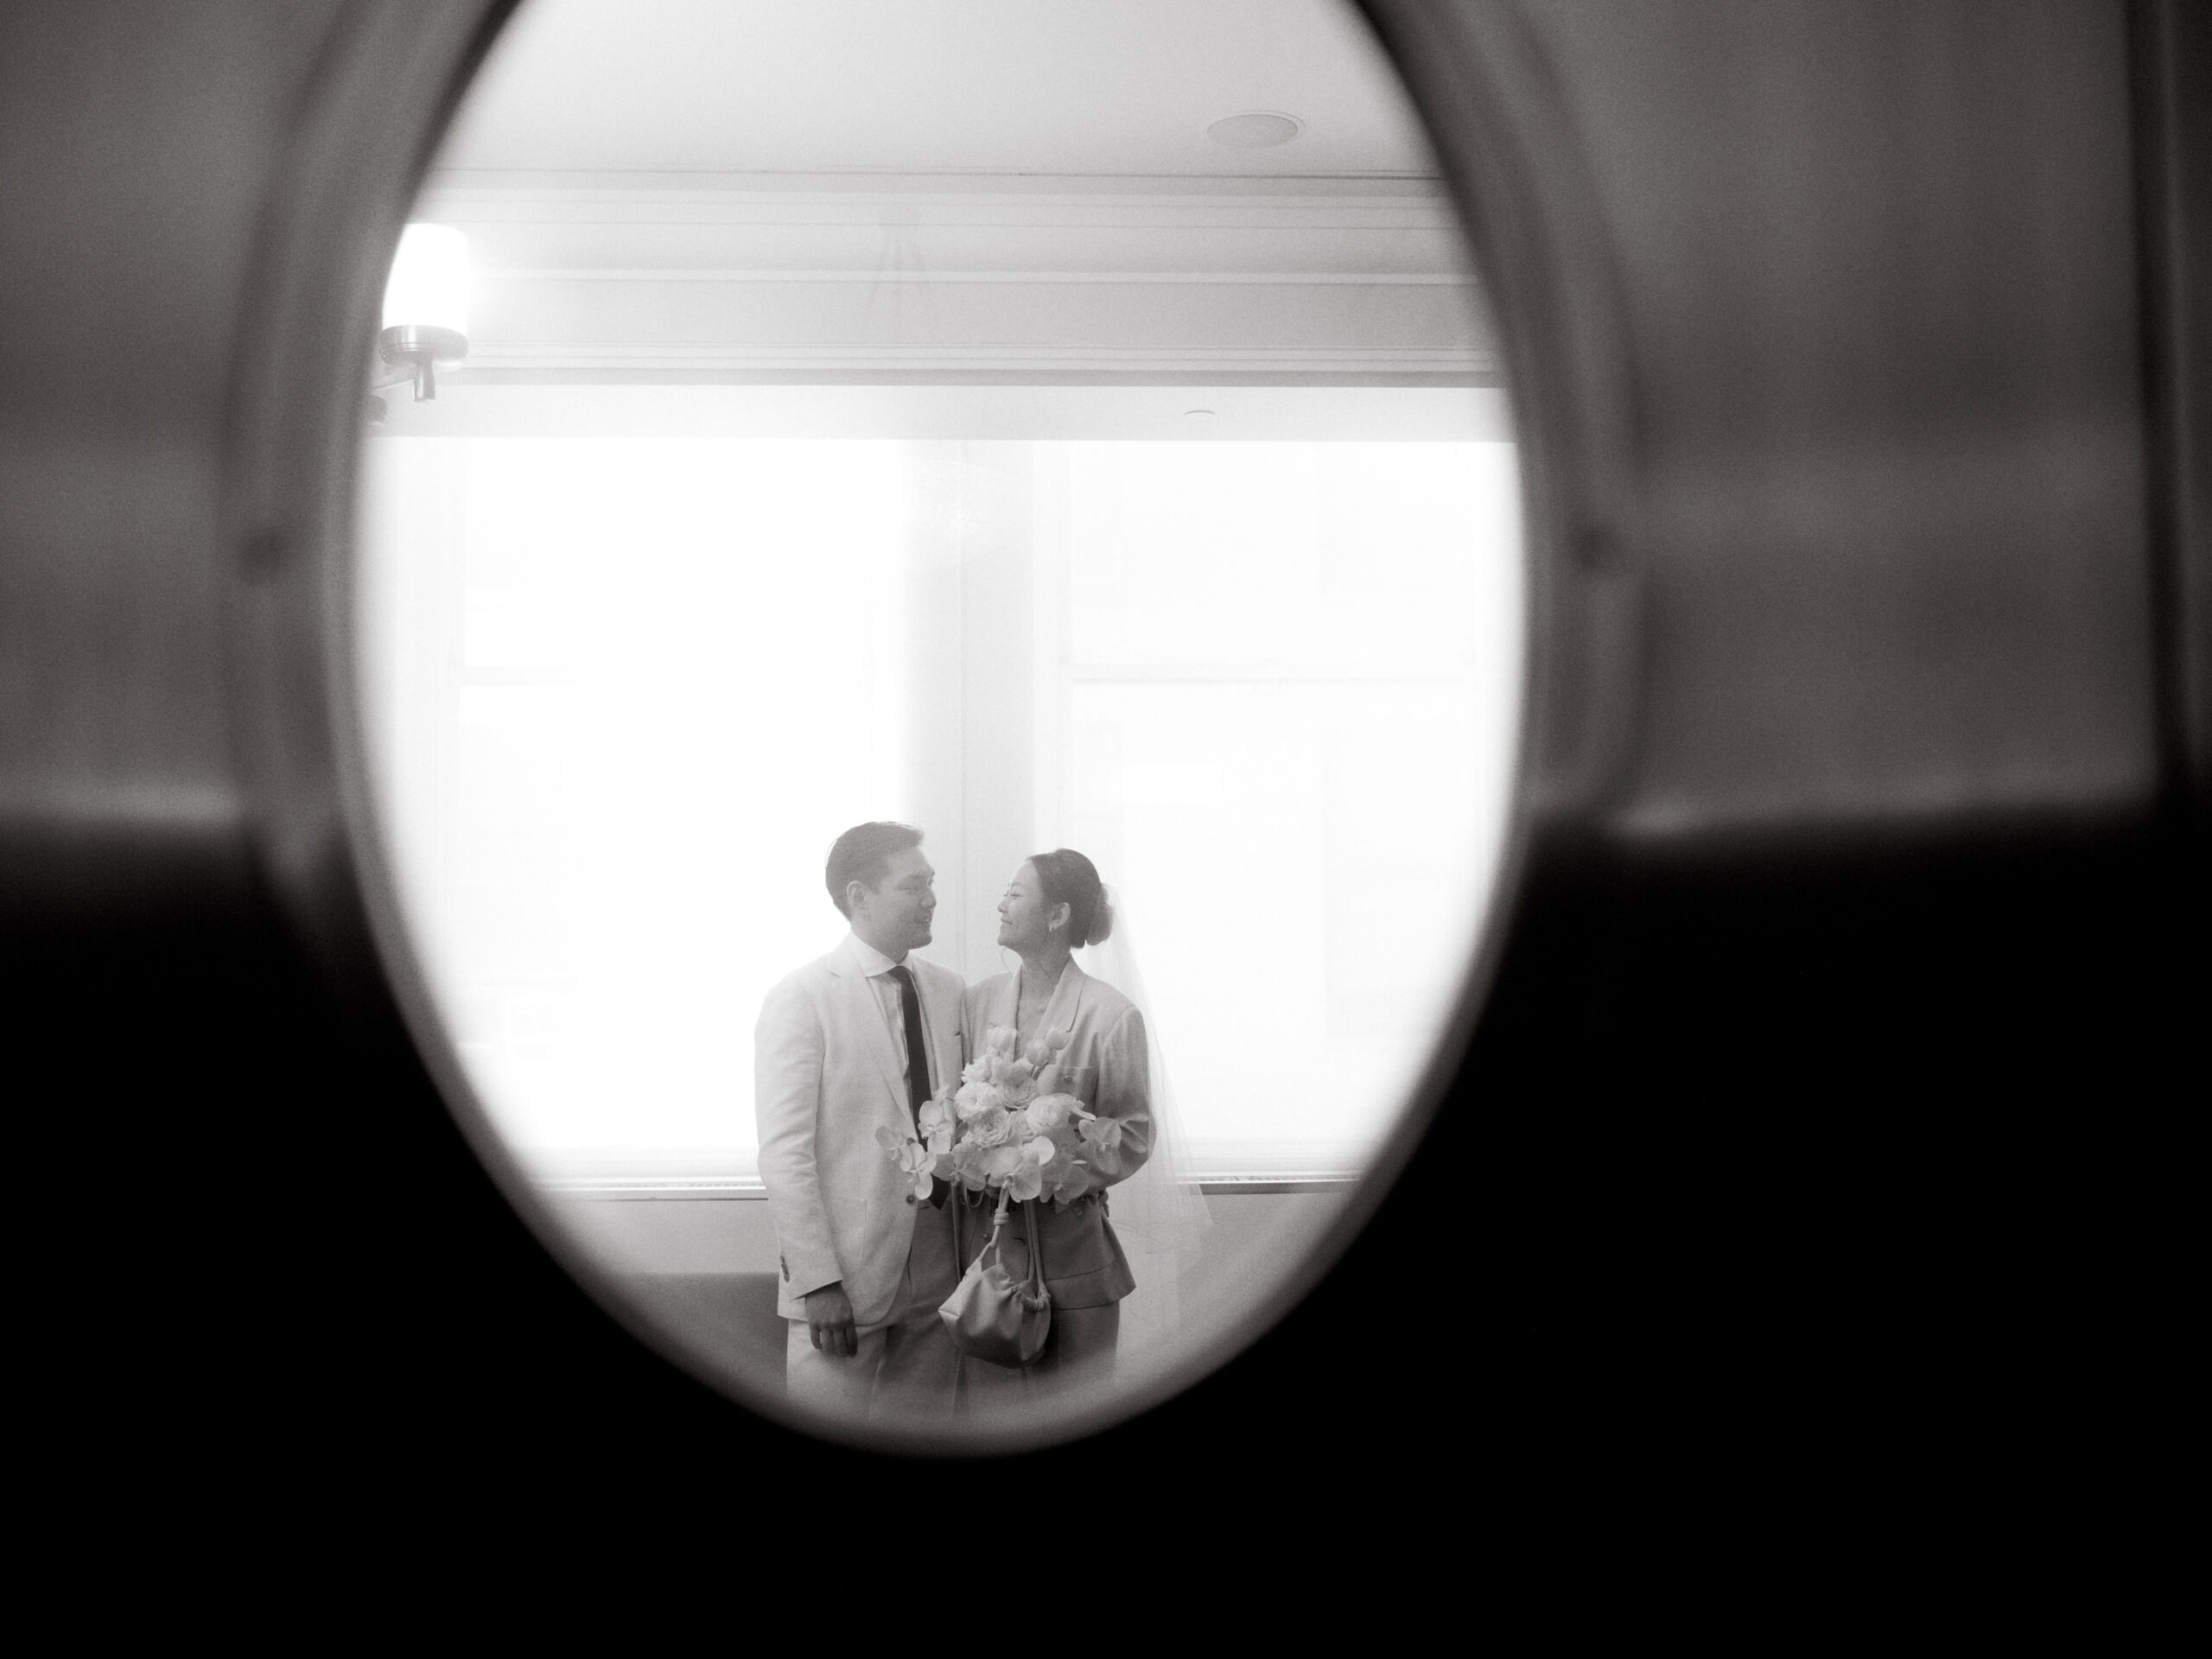 Black and white image of the bride and groom through the door window. Documentary Wedding Photography Image by Jenny Fu Studio